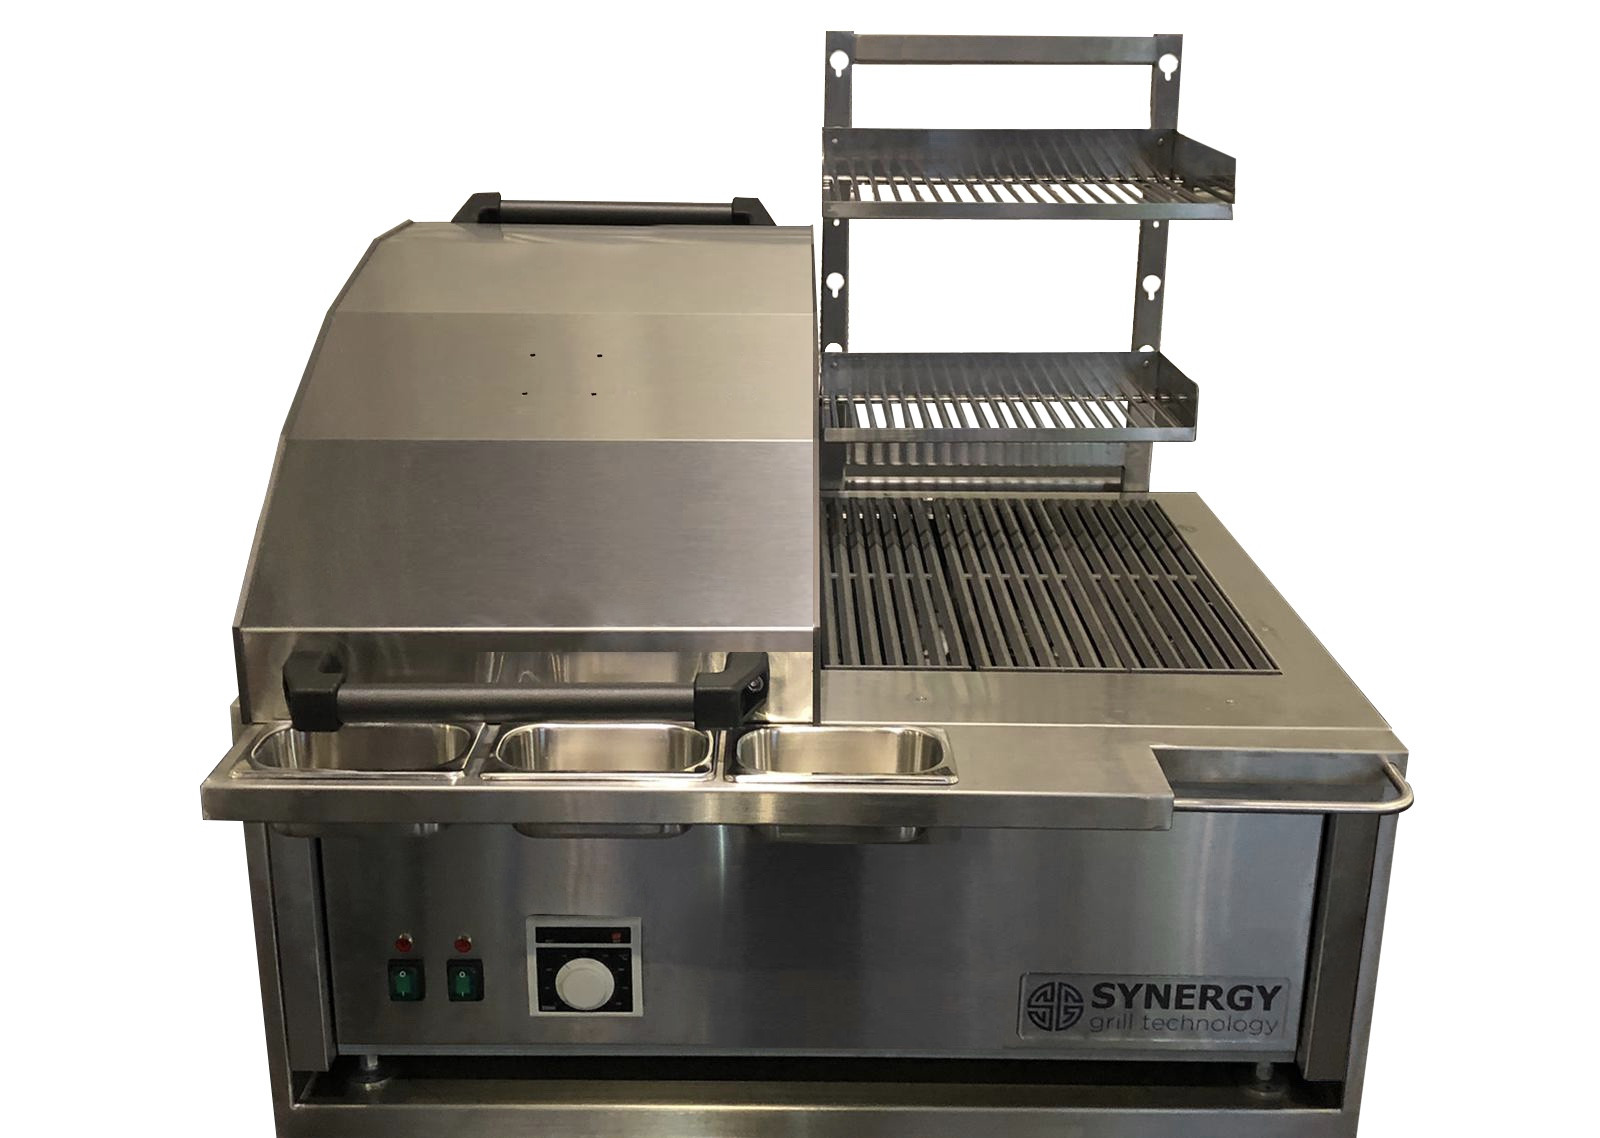 CGO900DUAL Chargrill Oven